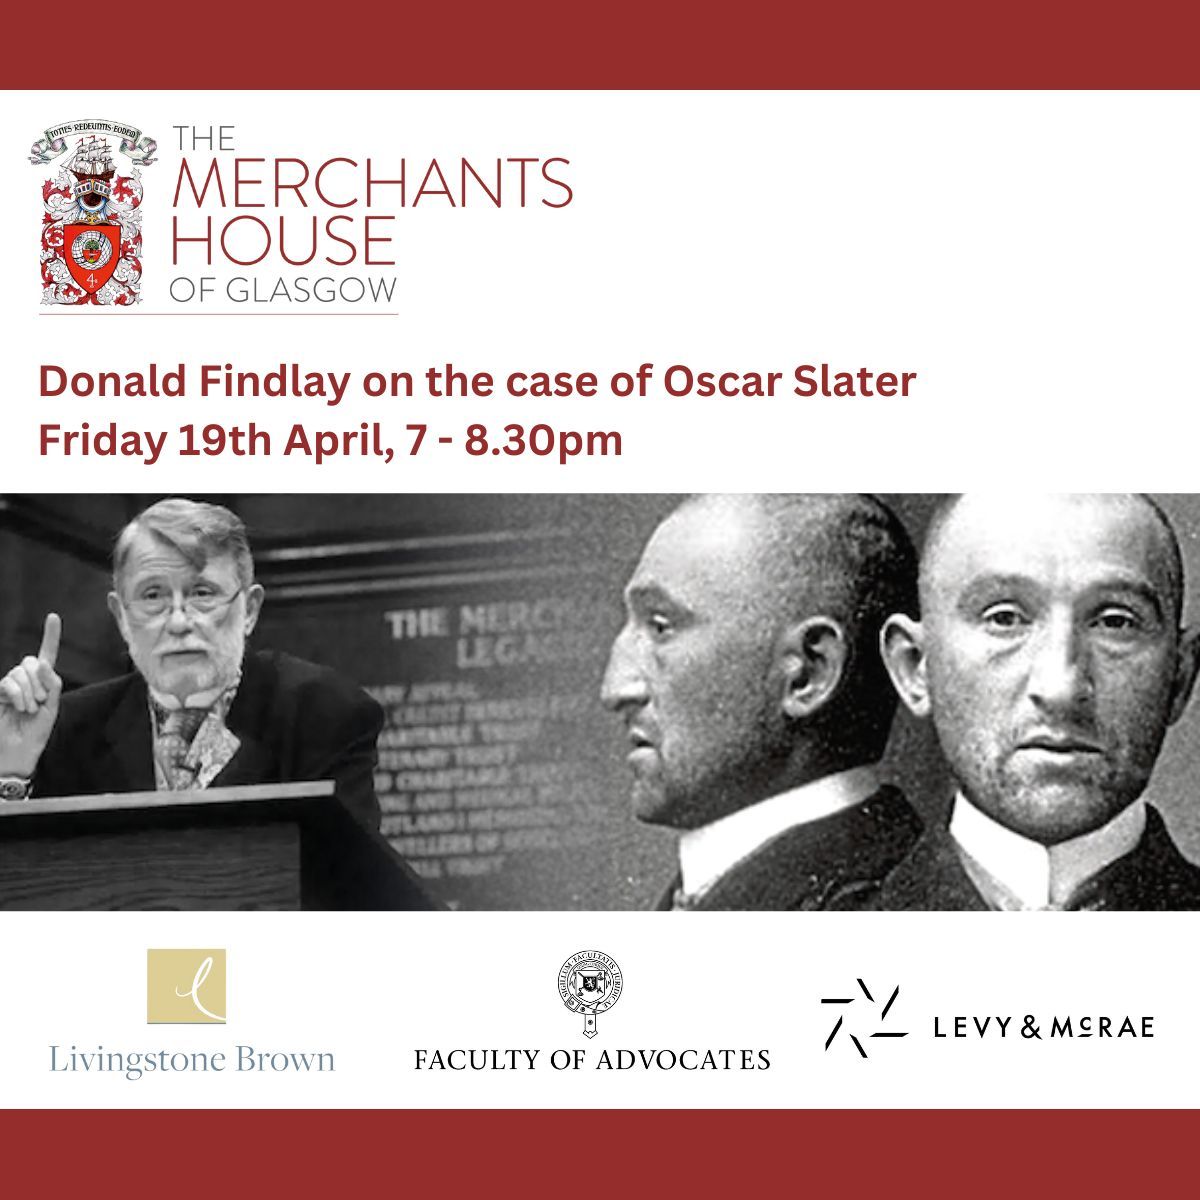 Just one week to go - have you got your tickets yet? Donald Findlay will be telling the tale of Oscar Slater, who was the victim of a notorious miscarriage of justice in Scotland which led to changes in the law. Book here: buff.ly/49RZPOr